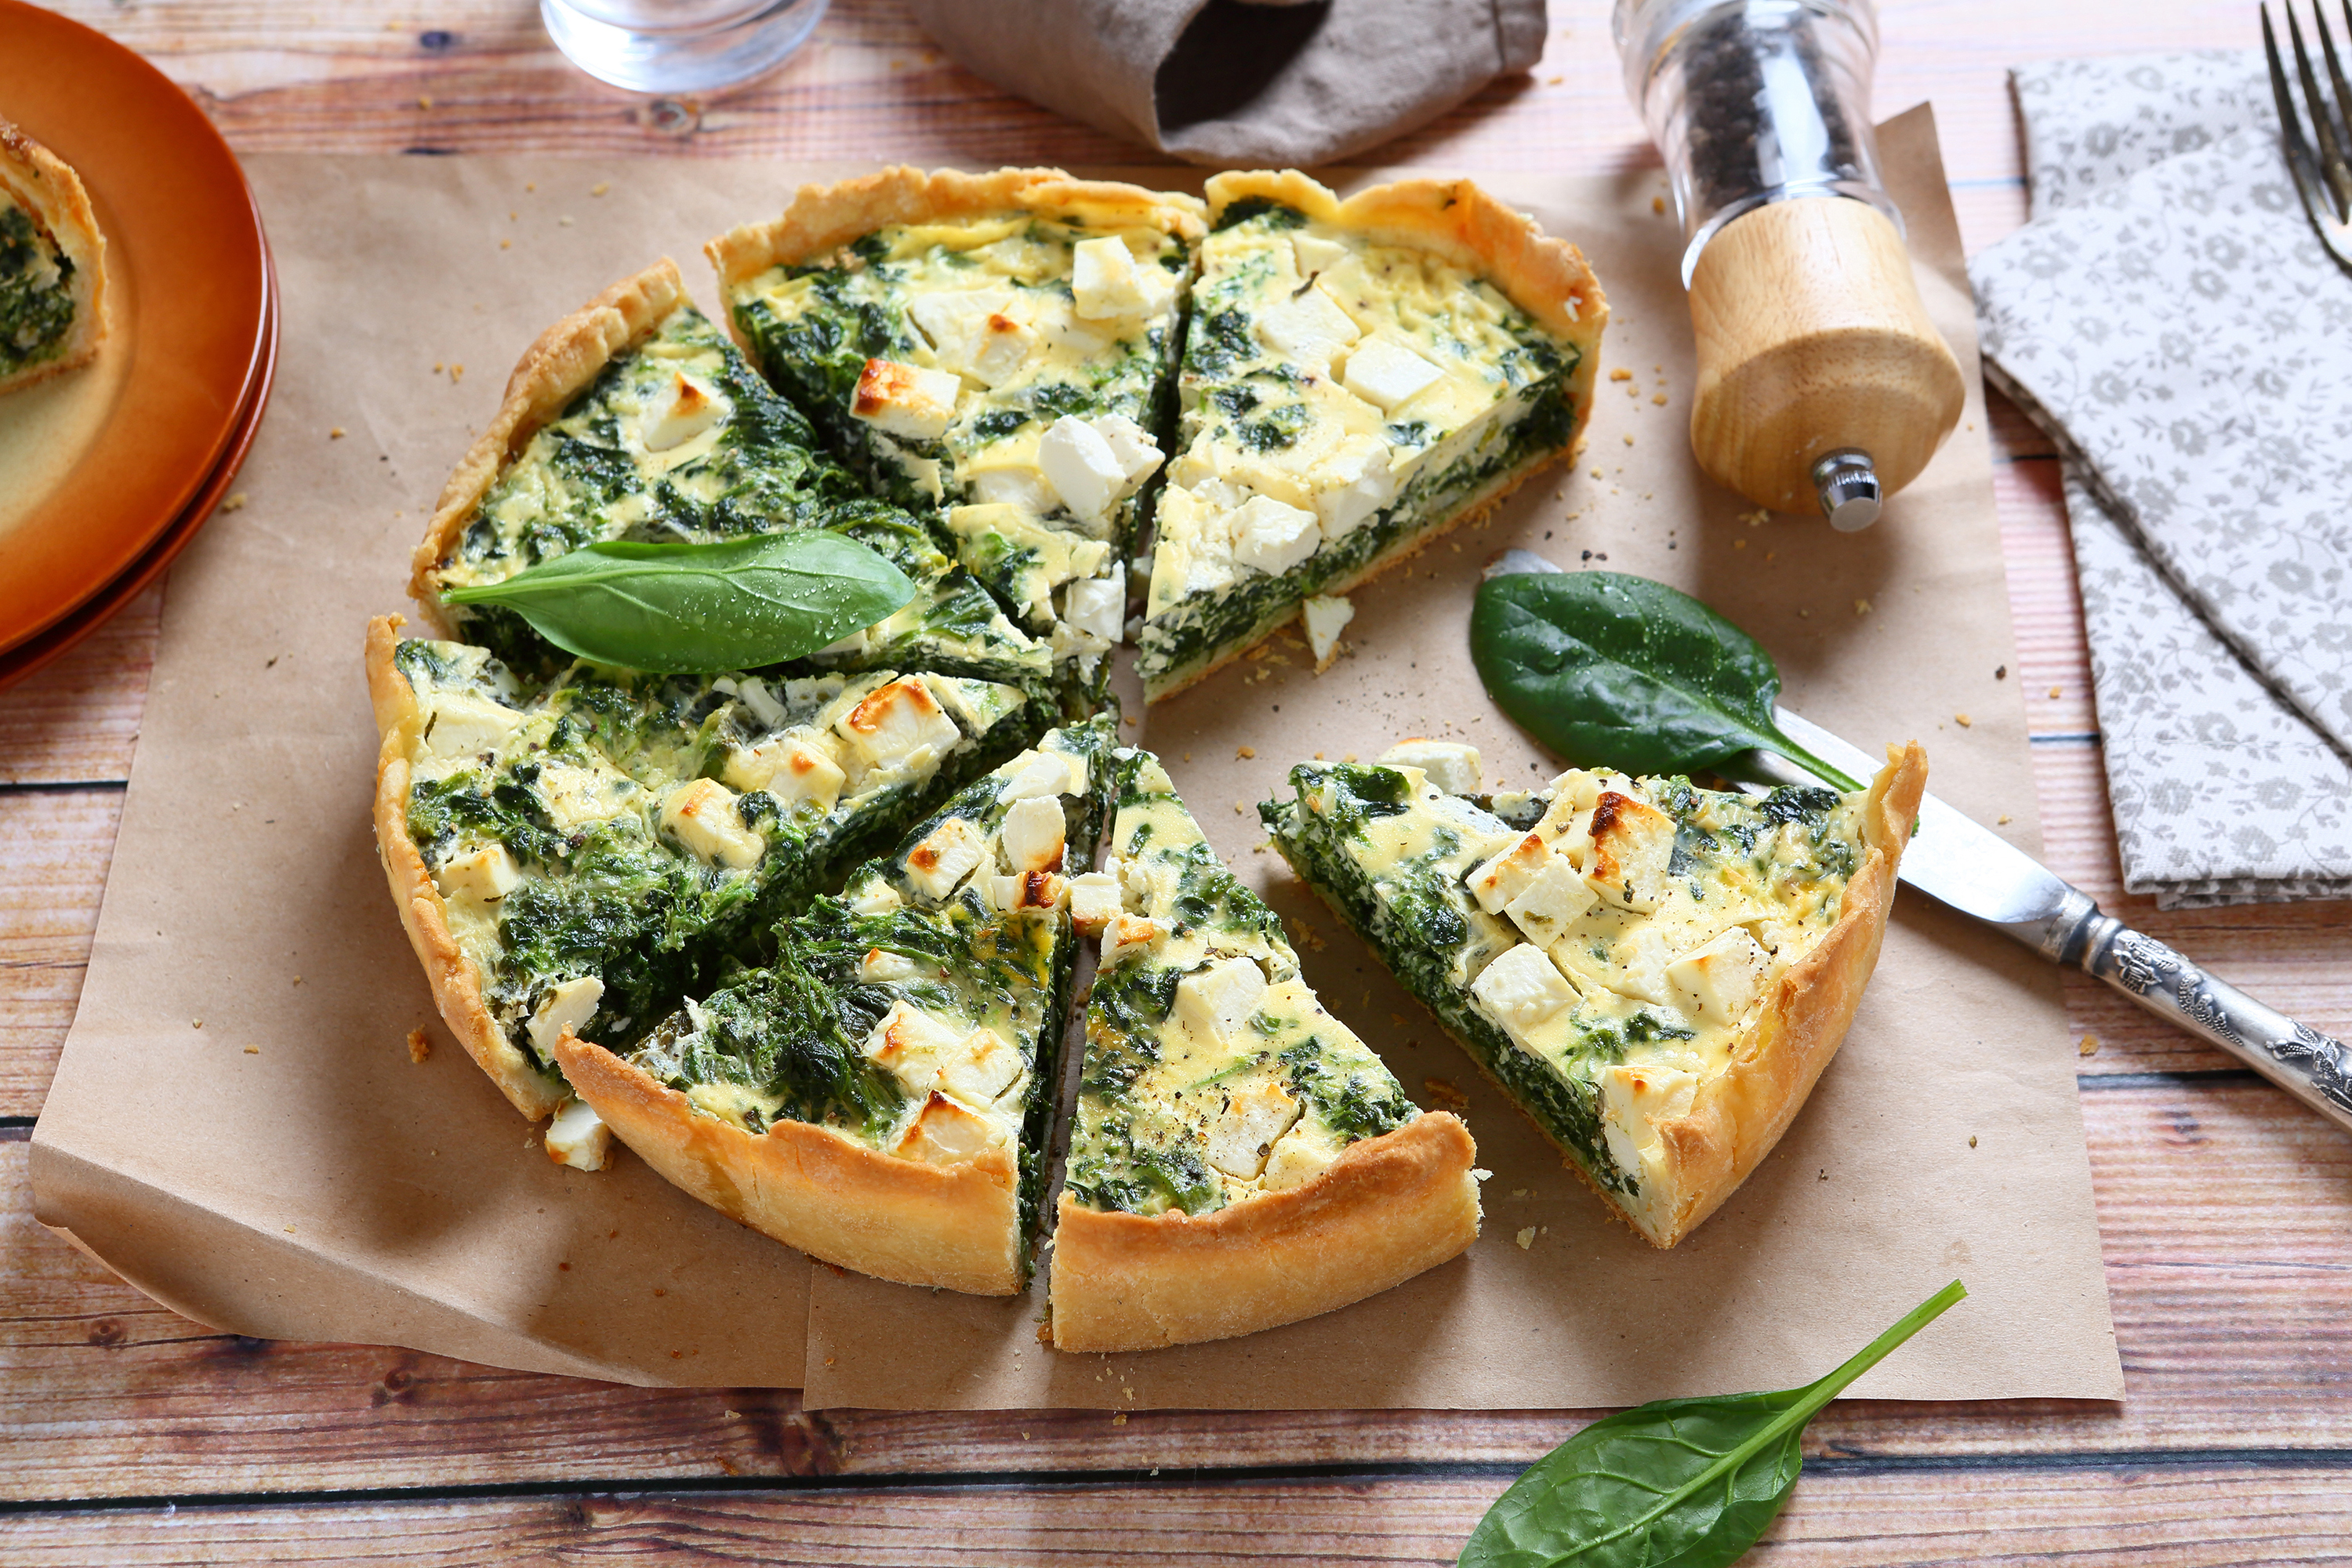 Torta Pascualina - Argentina Spinach and Ricotta Tart/Pie - The Spice Chica™